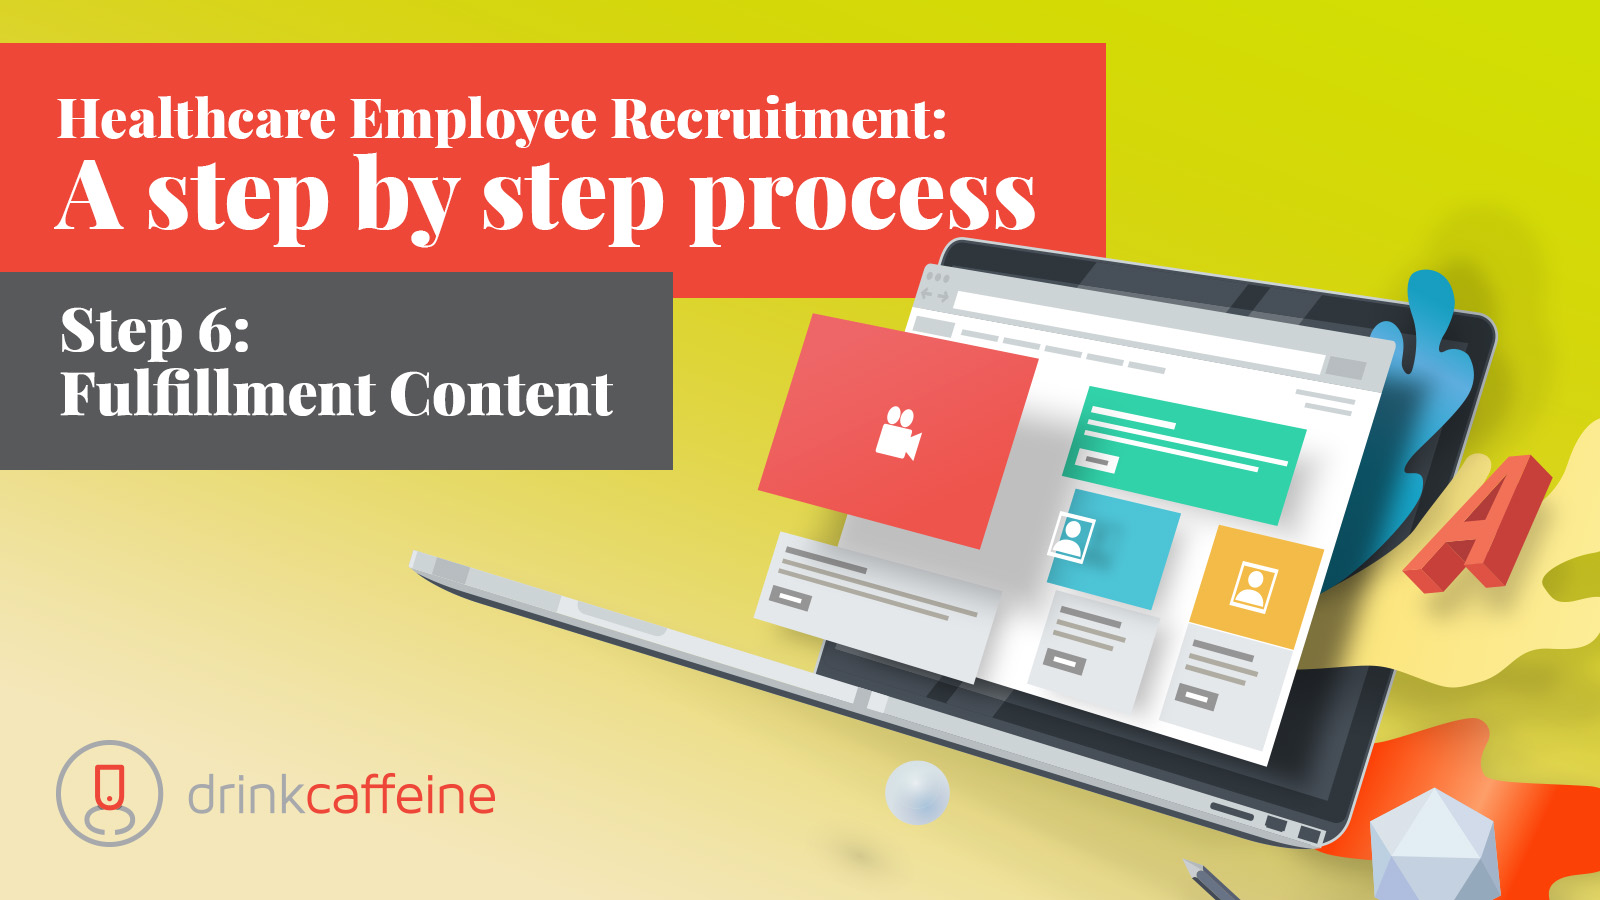 Healthcare Employee Recruitment Step 6: Fulfillment Content blog image